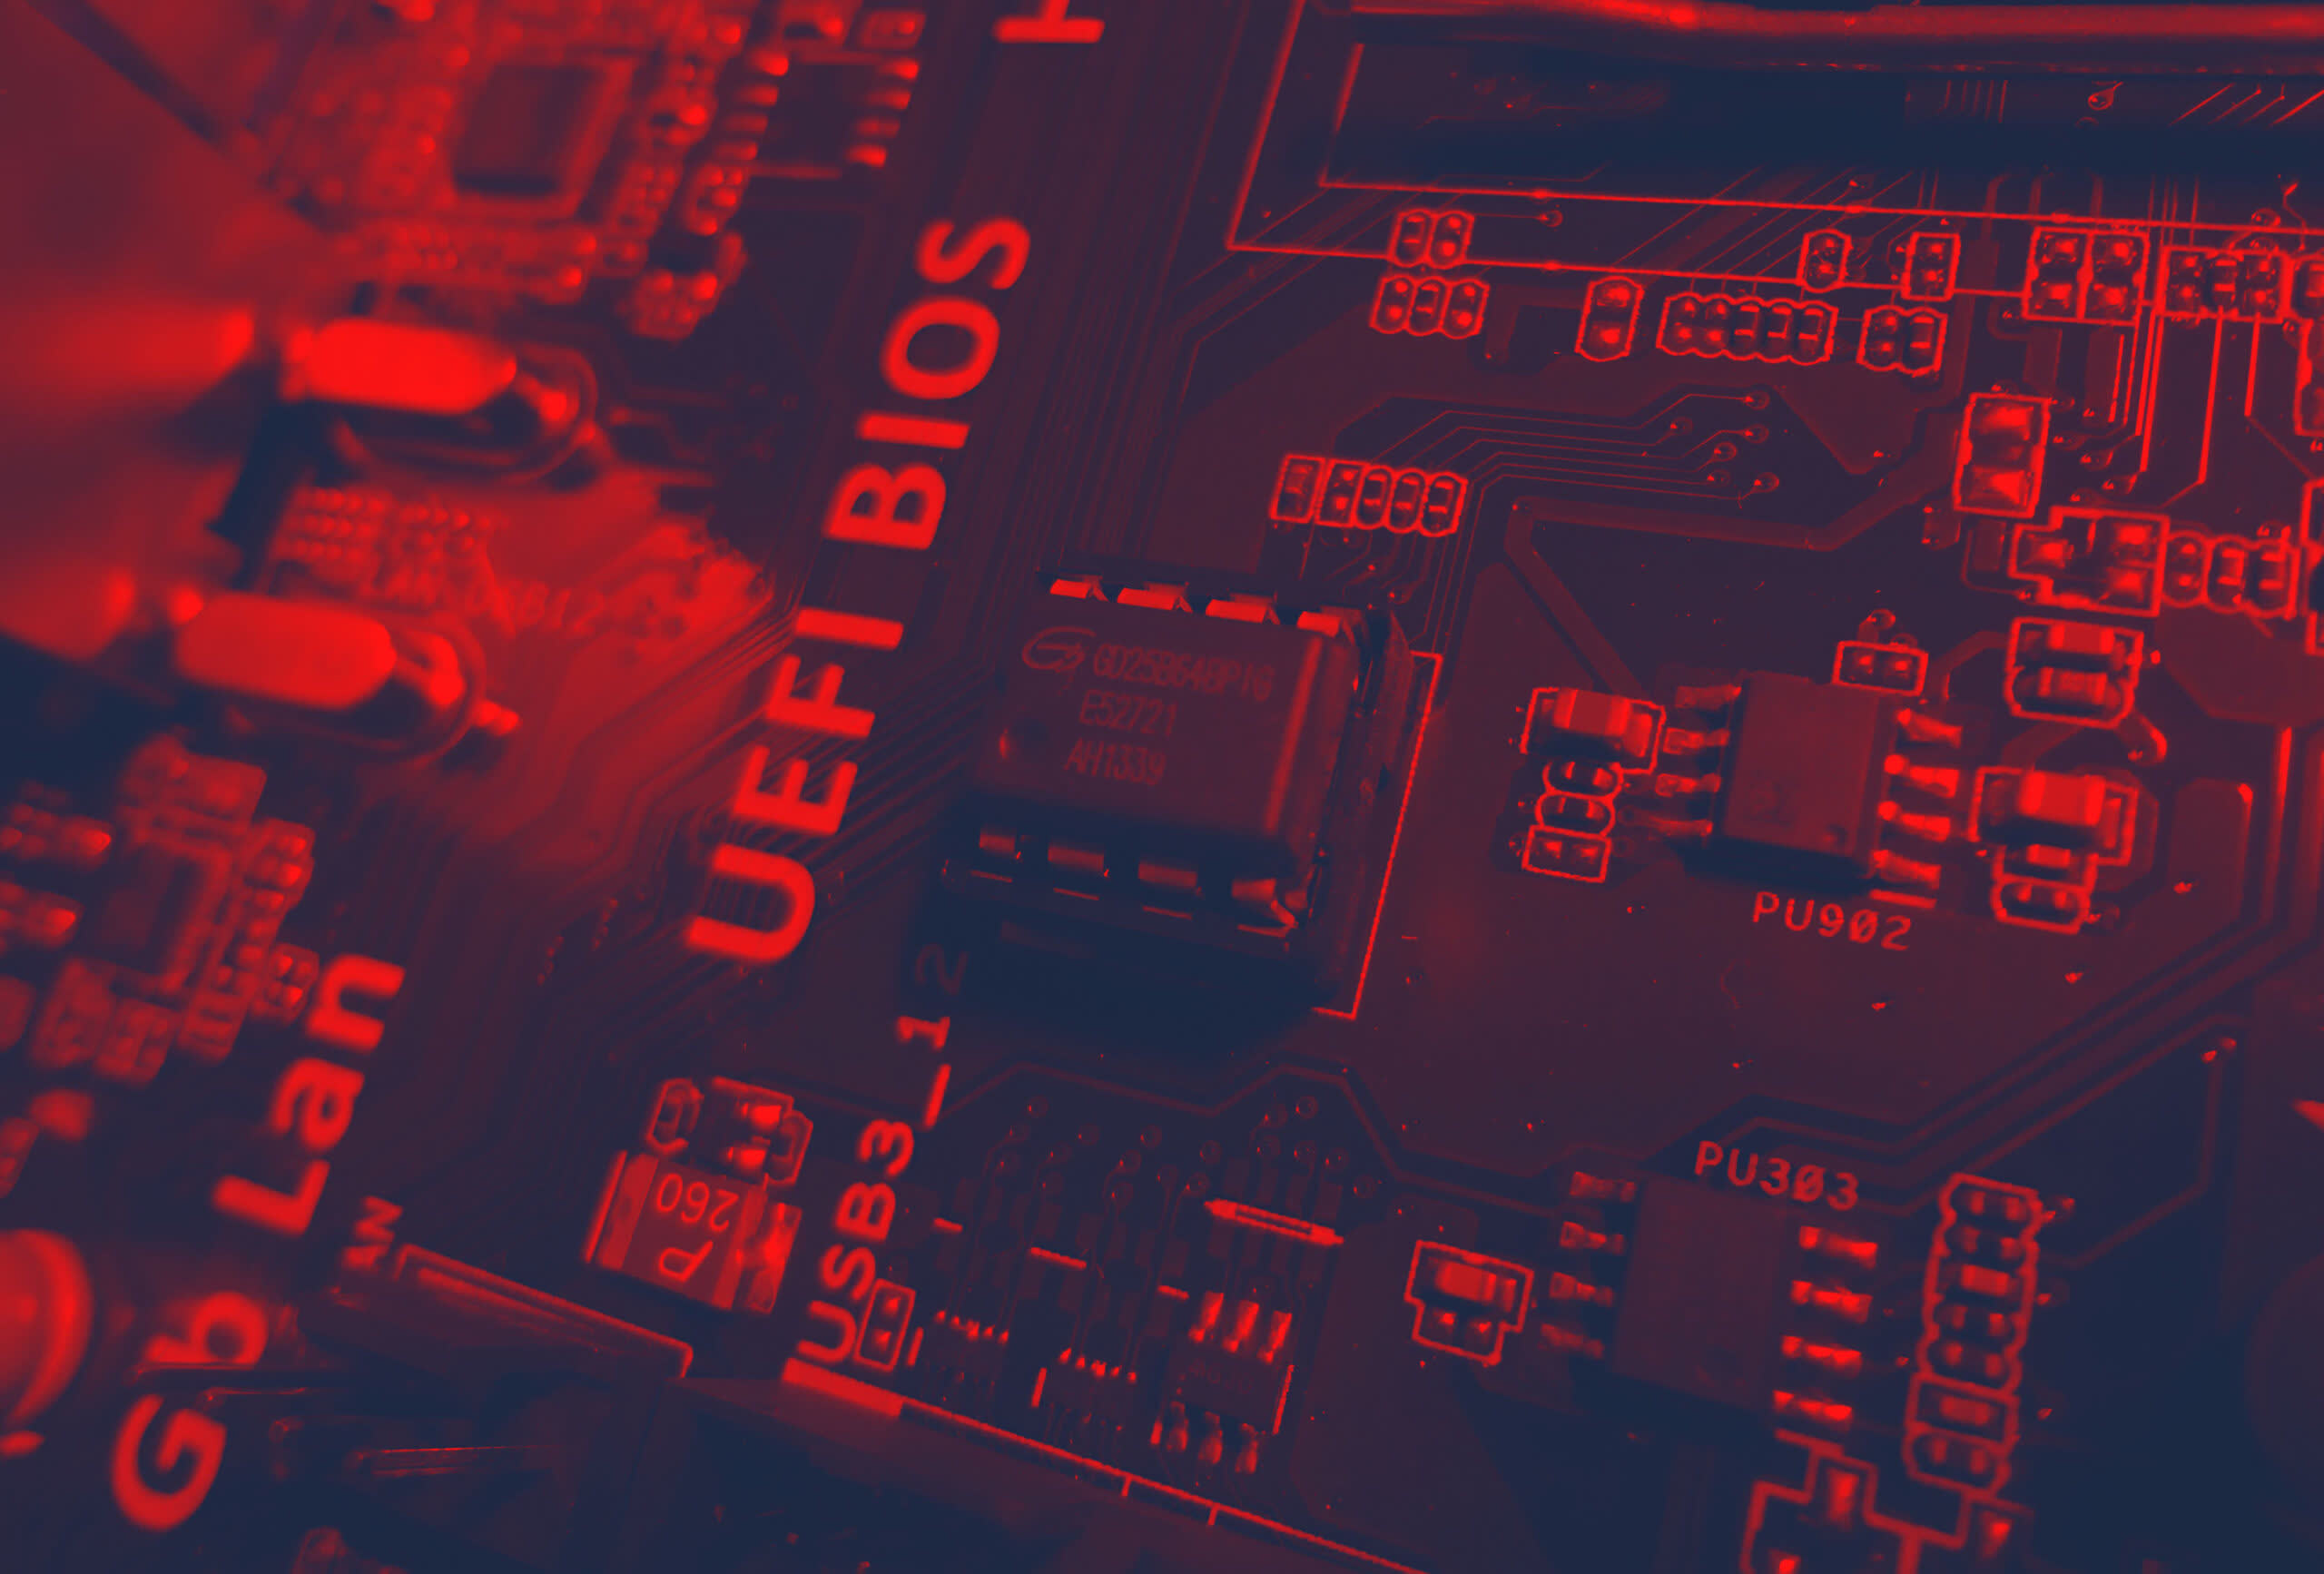 BlackLotus, the new UEFI rootkit that makes security researchers worry